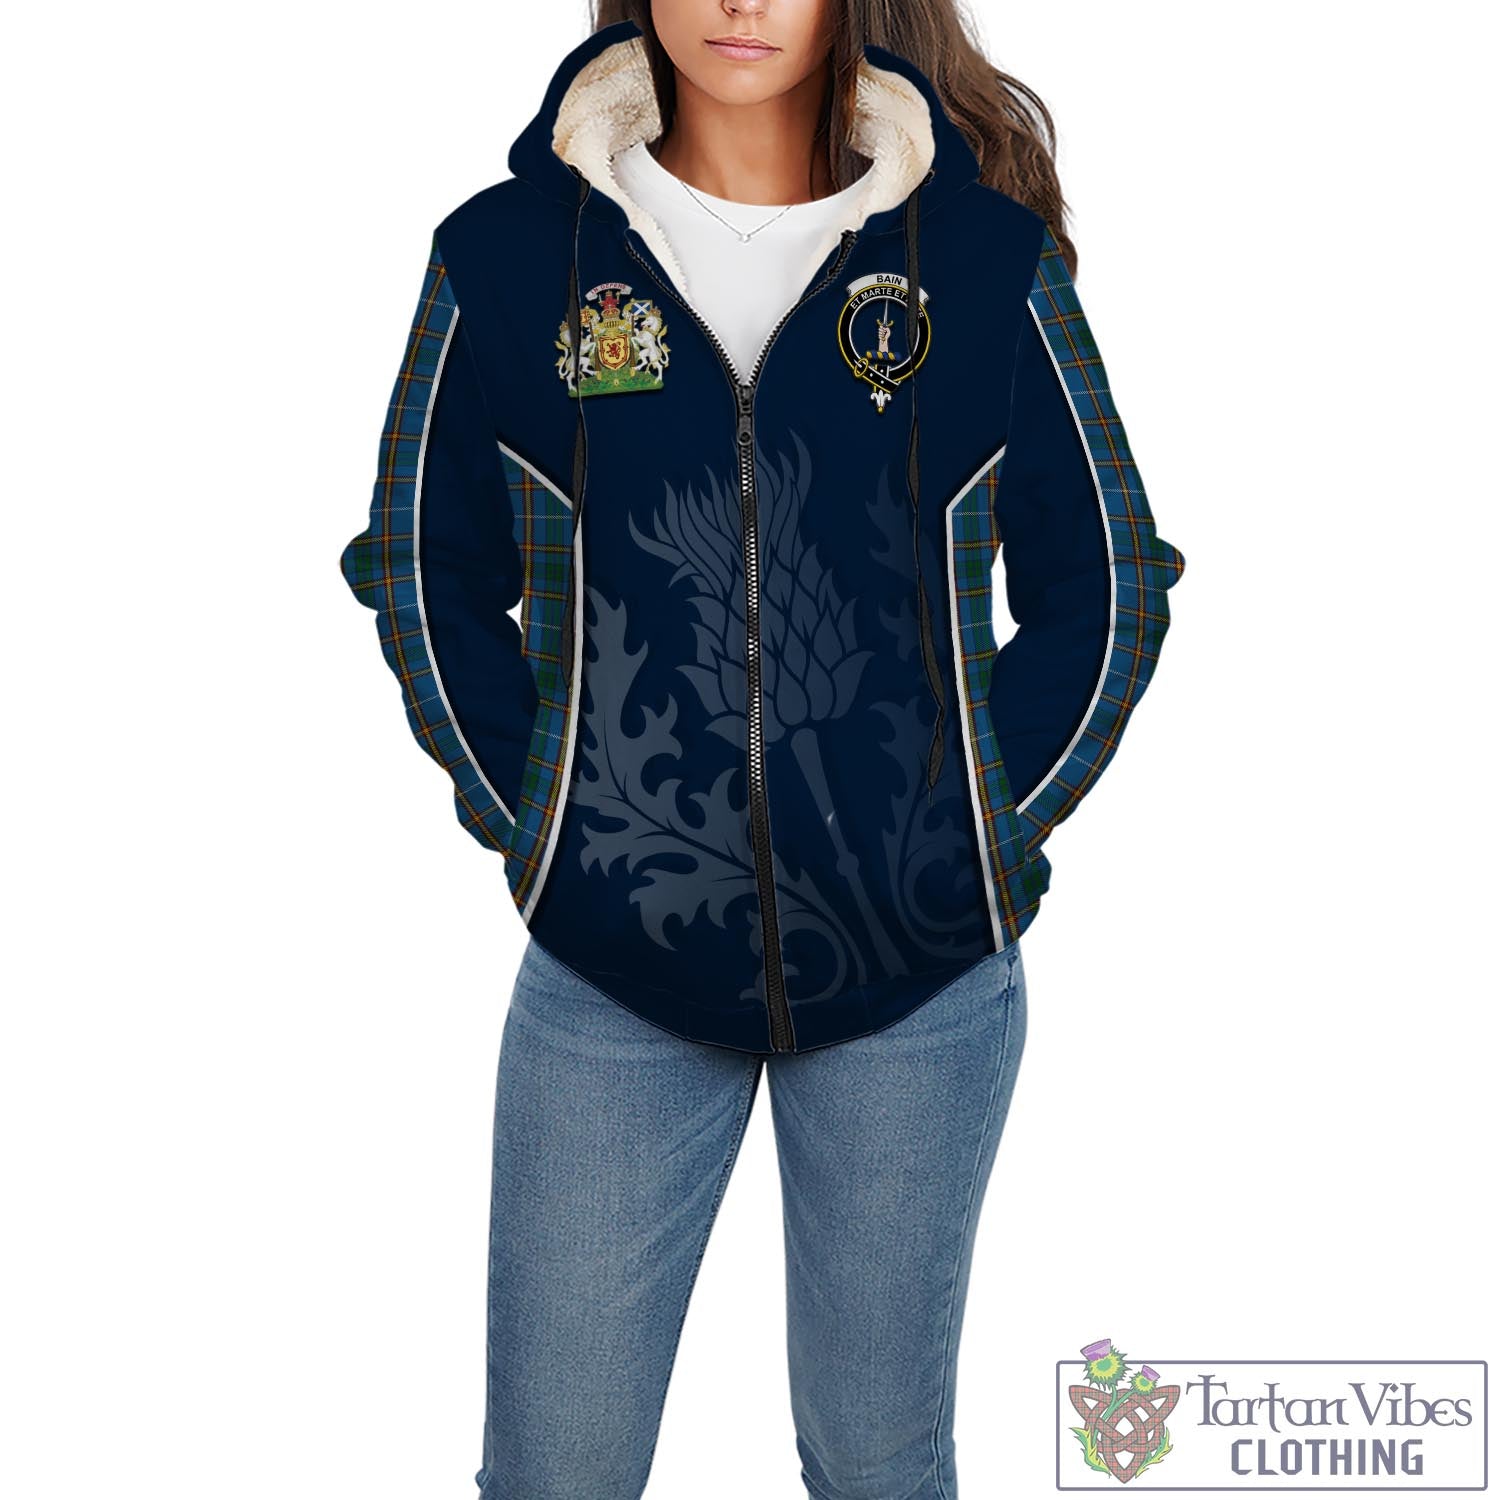 Tartan Vibes Clothing Bain Tartan Sherpa Hoodie with Family Crest and Scottish Thistle Vibes Sport Style